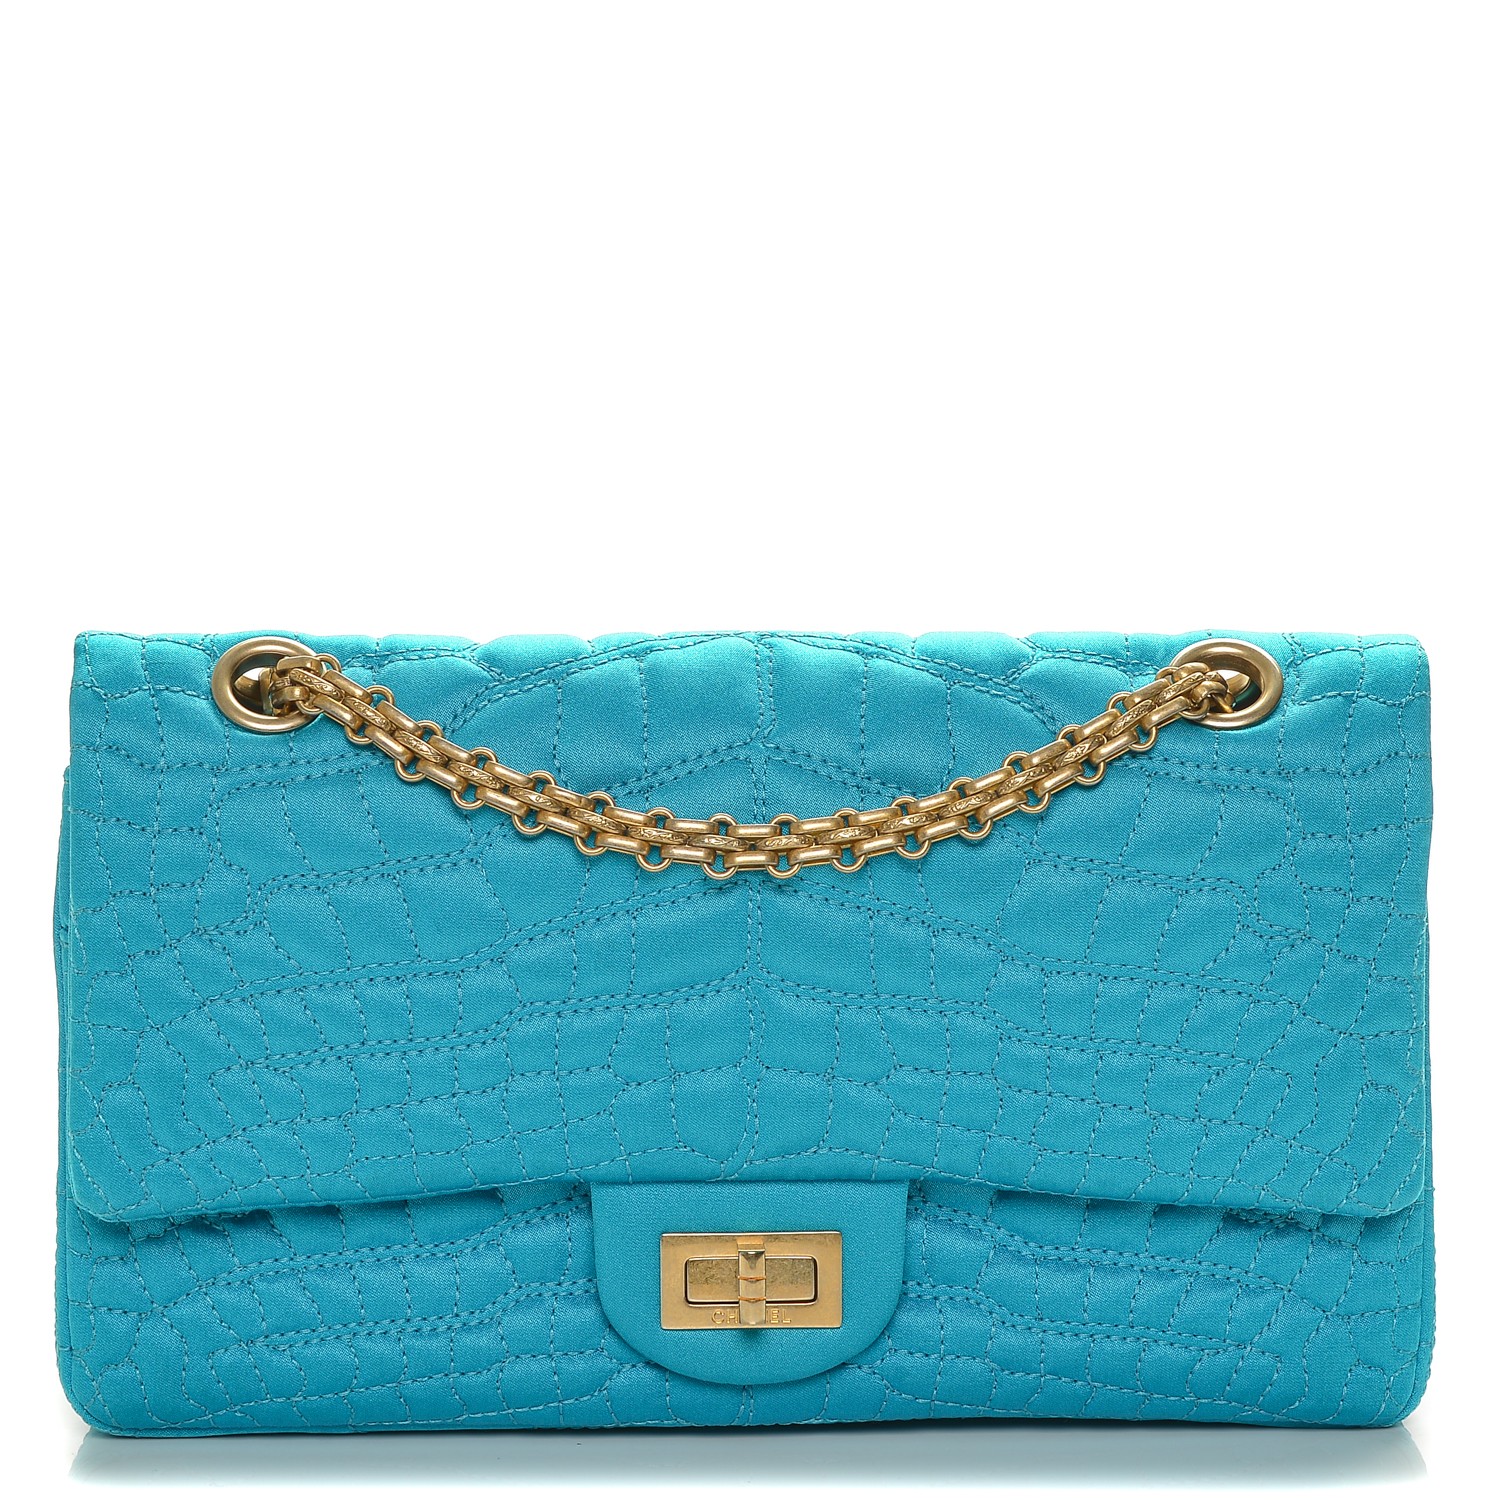 CHANEL Satin Coco's Croc 2.55 Reissue 225 Flap Turquoise 196480